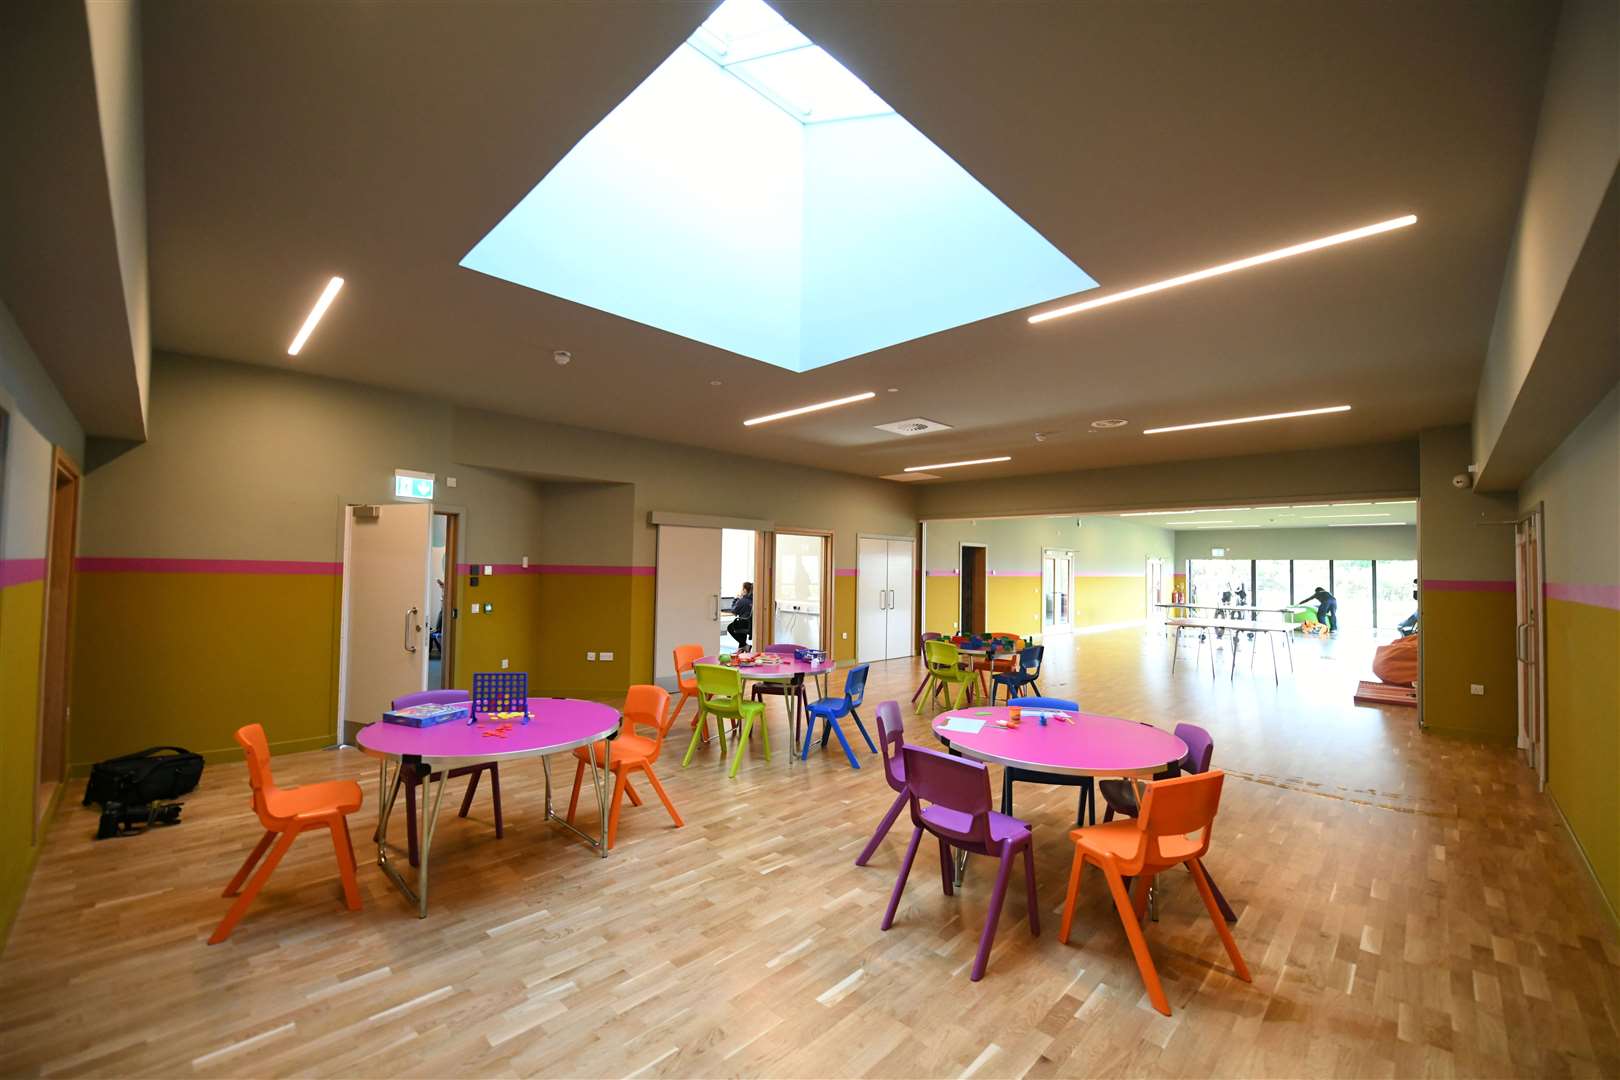 The Haven Centre aims to provide an inclusive community space.